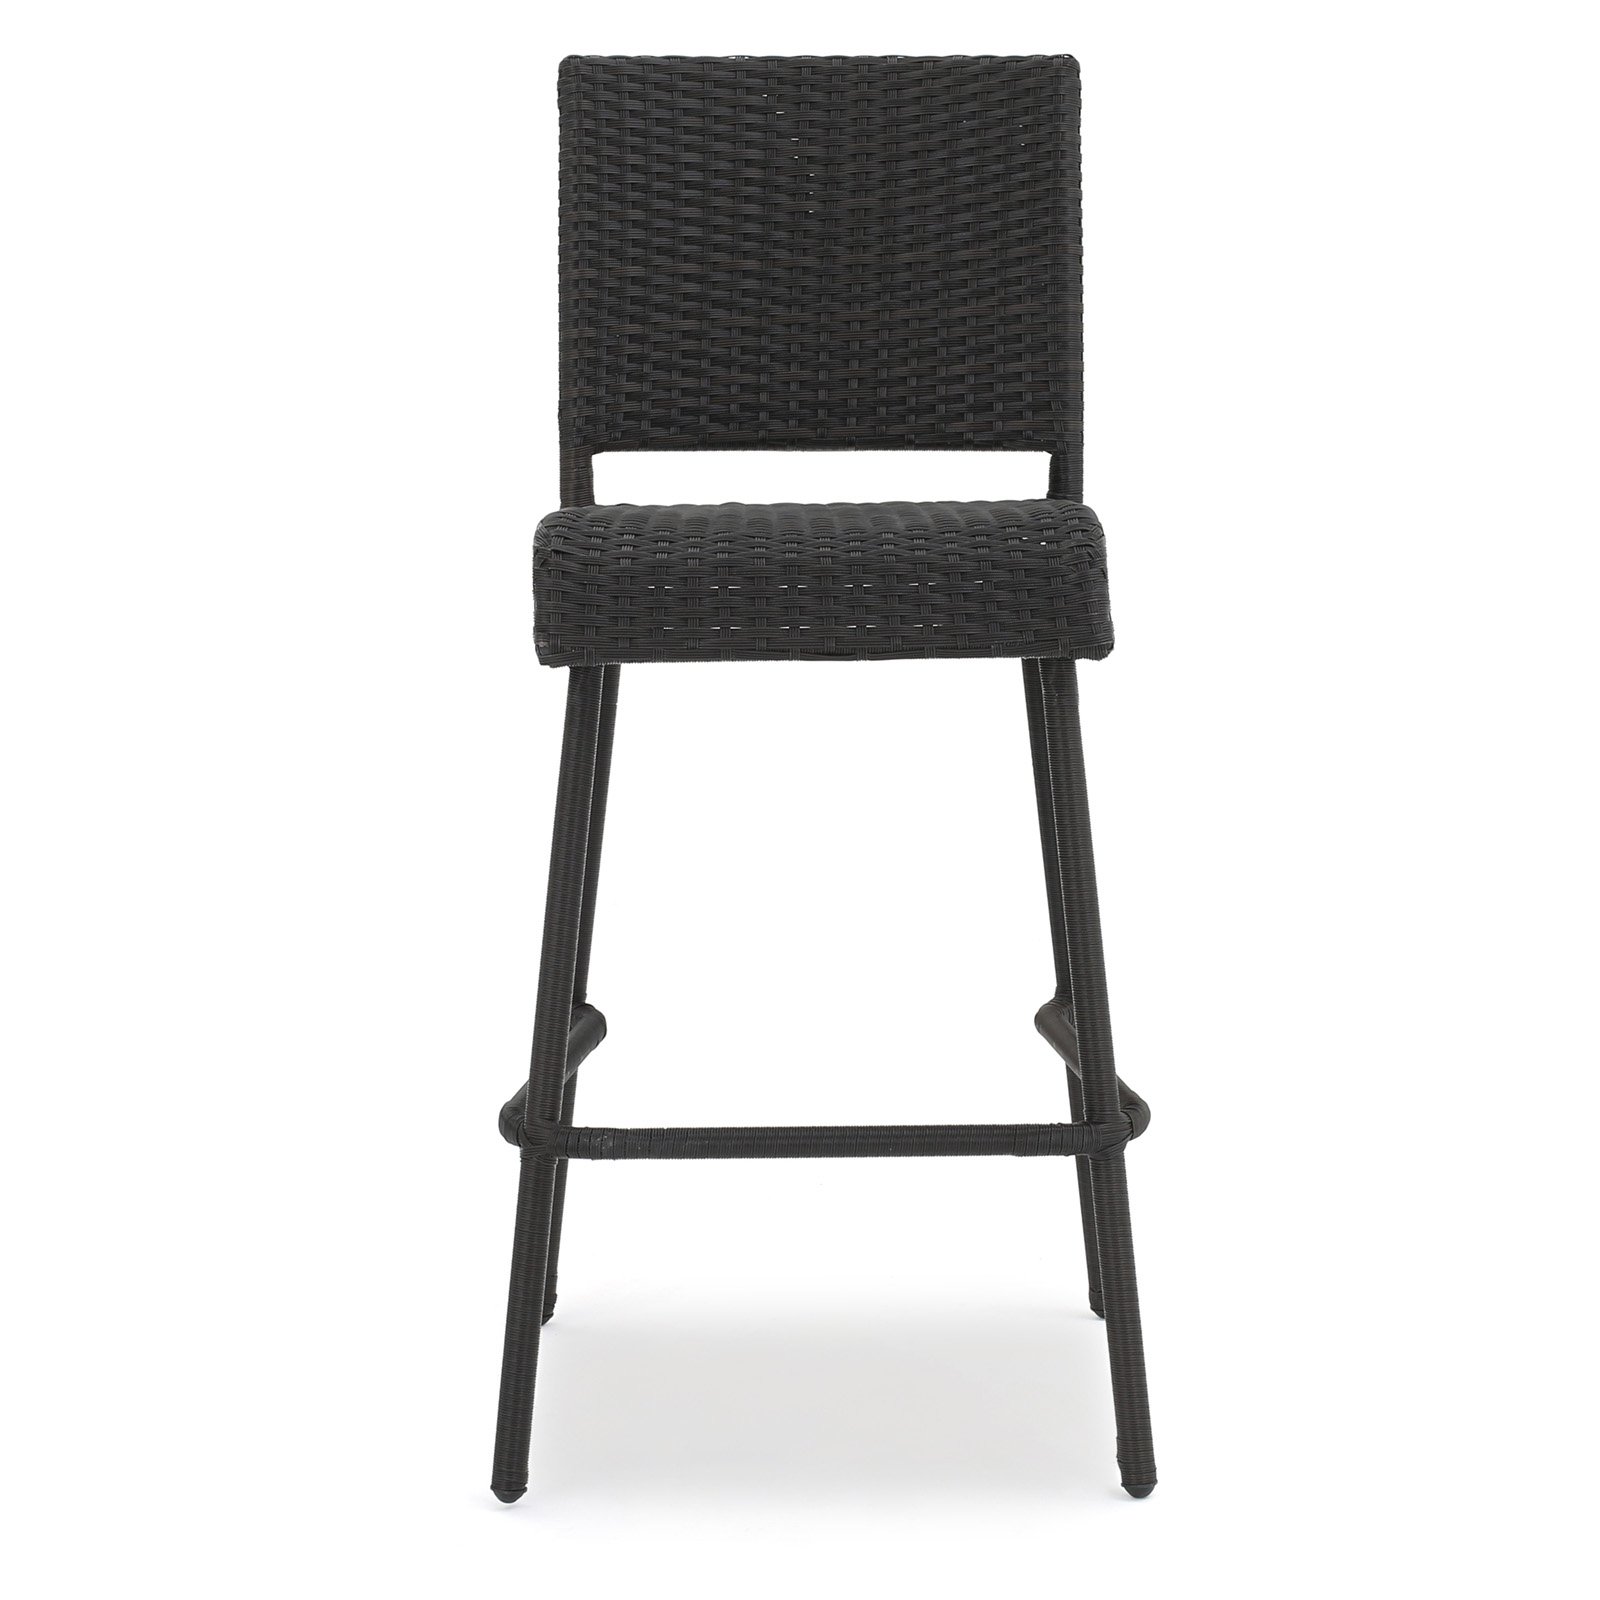 Trestle 29-Inch Outdoors Dark Brown Wicker Barstools (Set of 2) - image 3 of 11